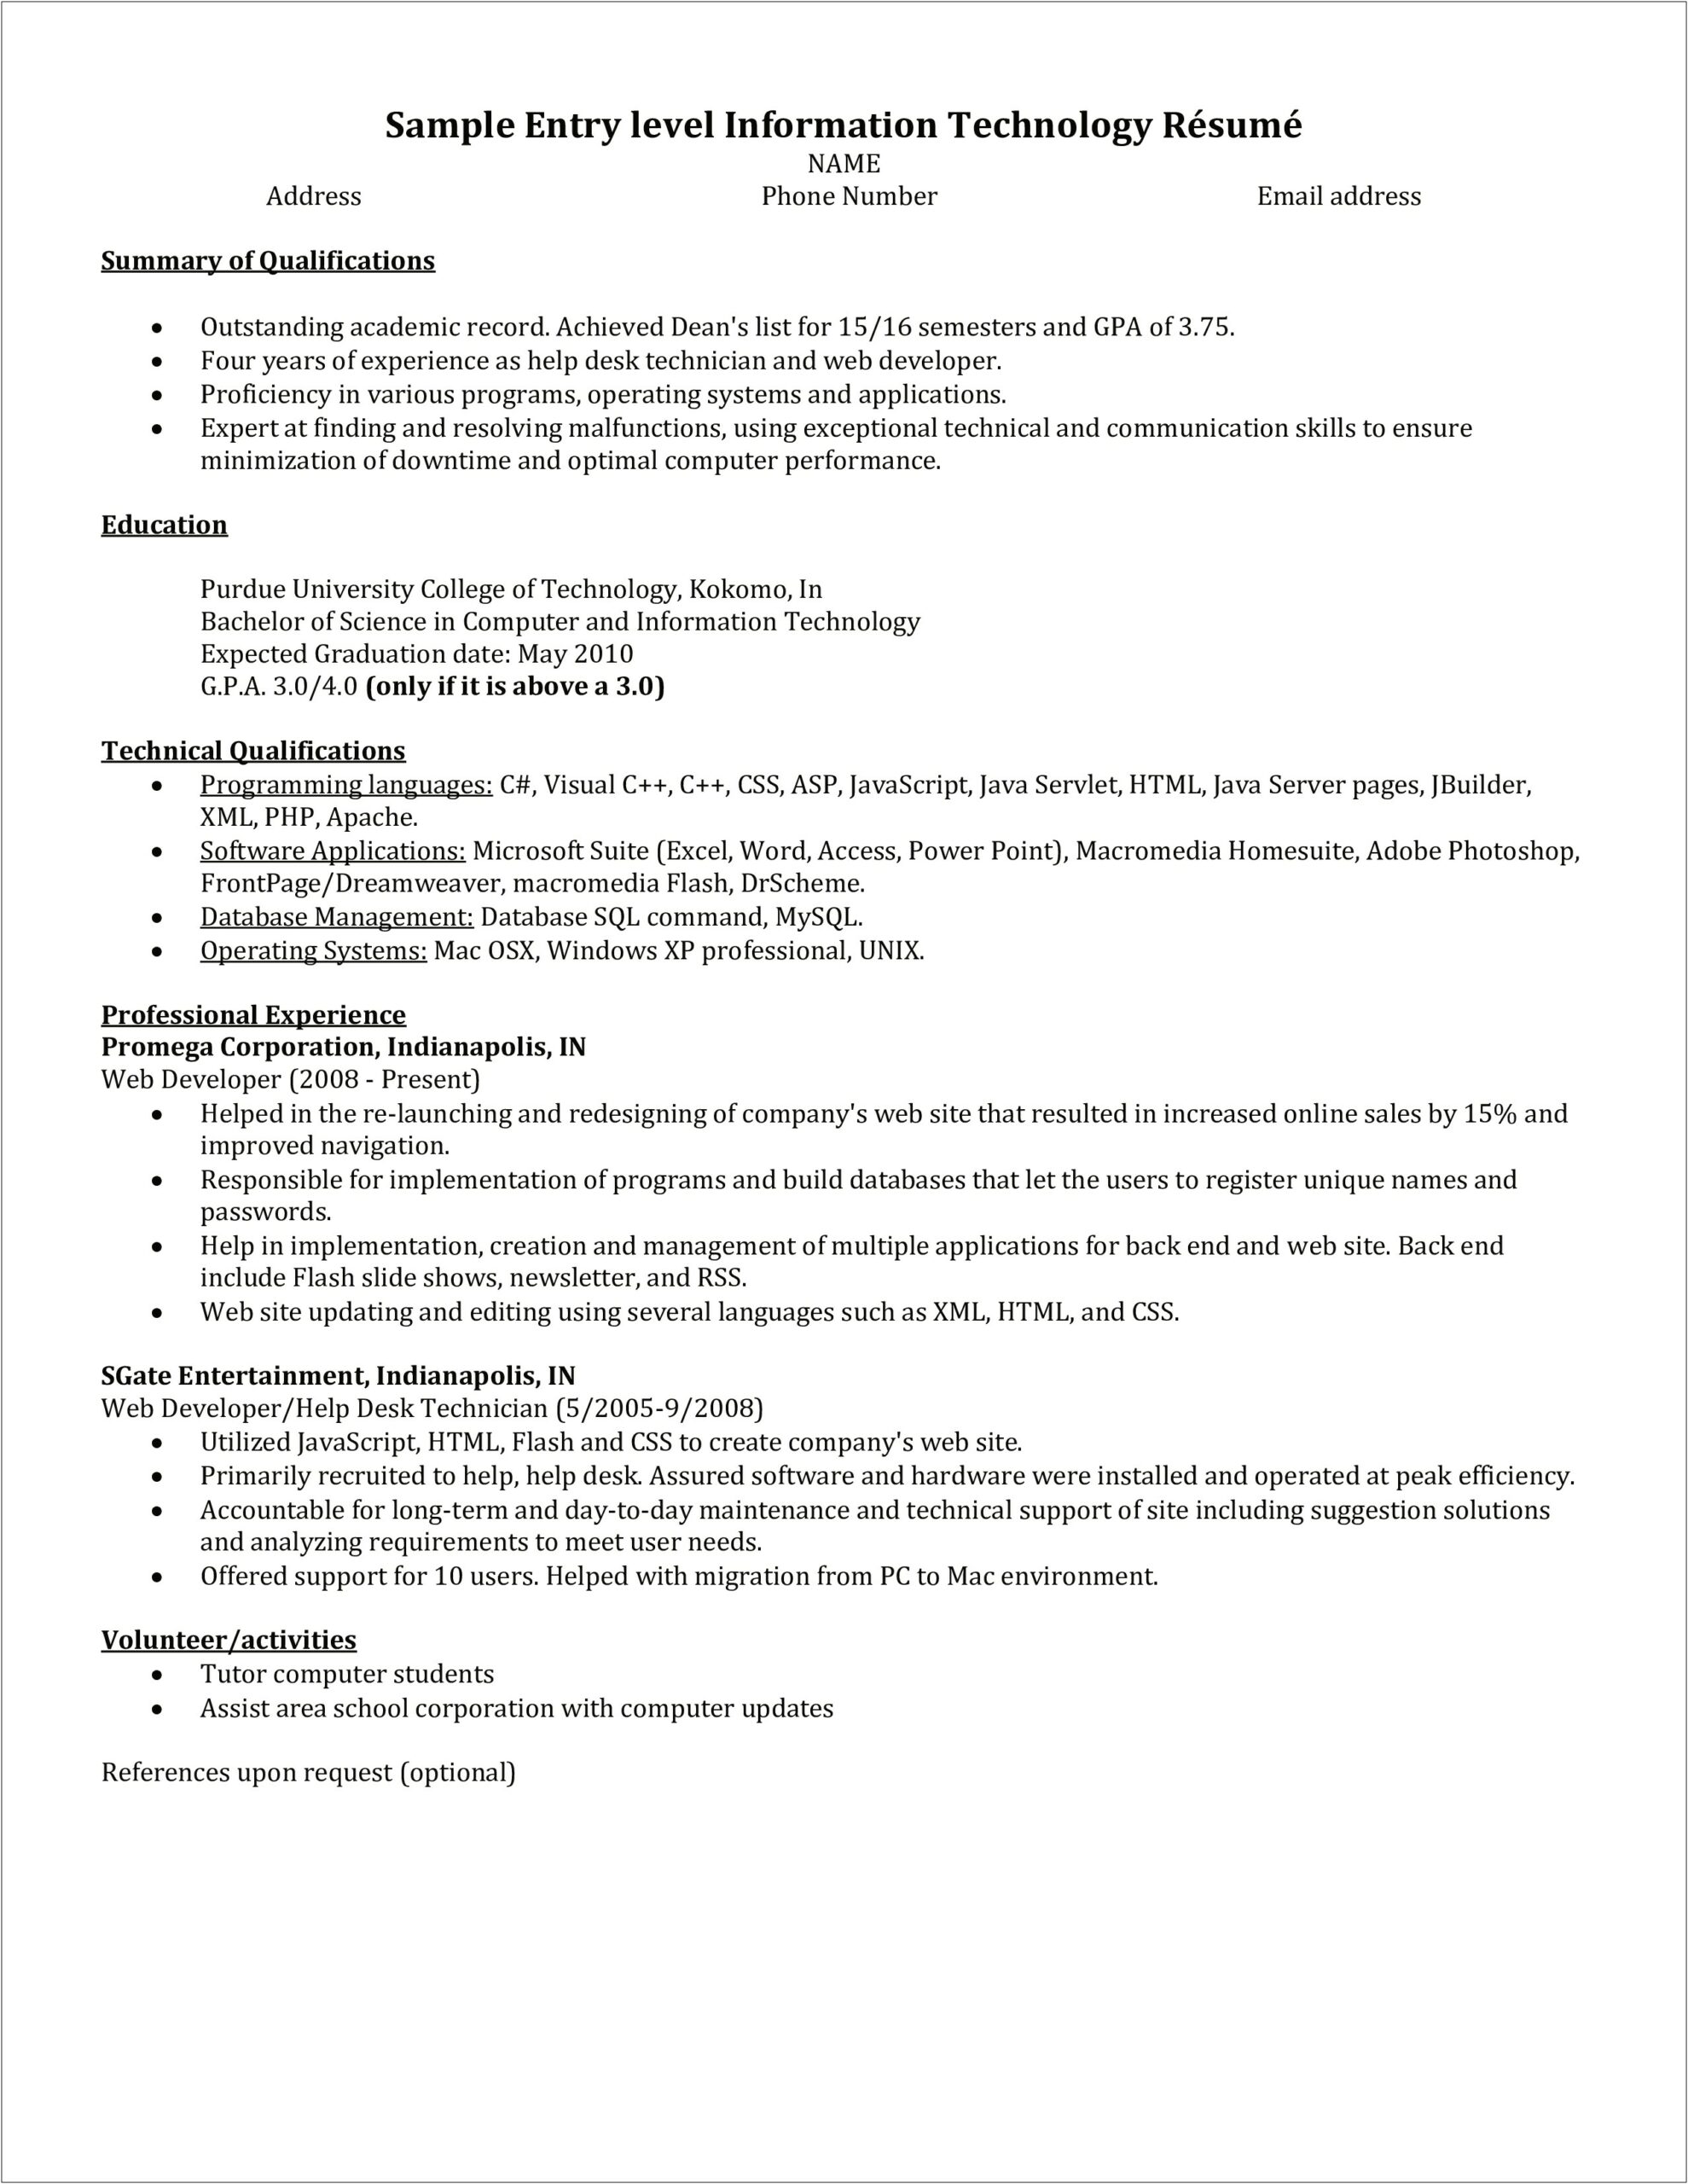 Resume Examples With References Upon Request